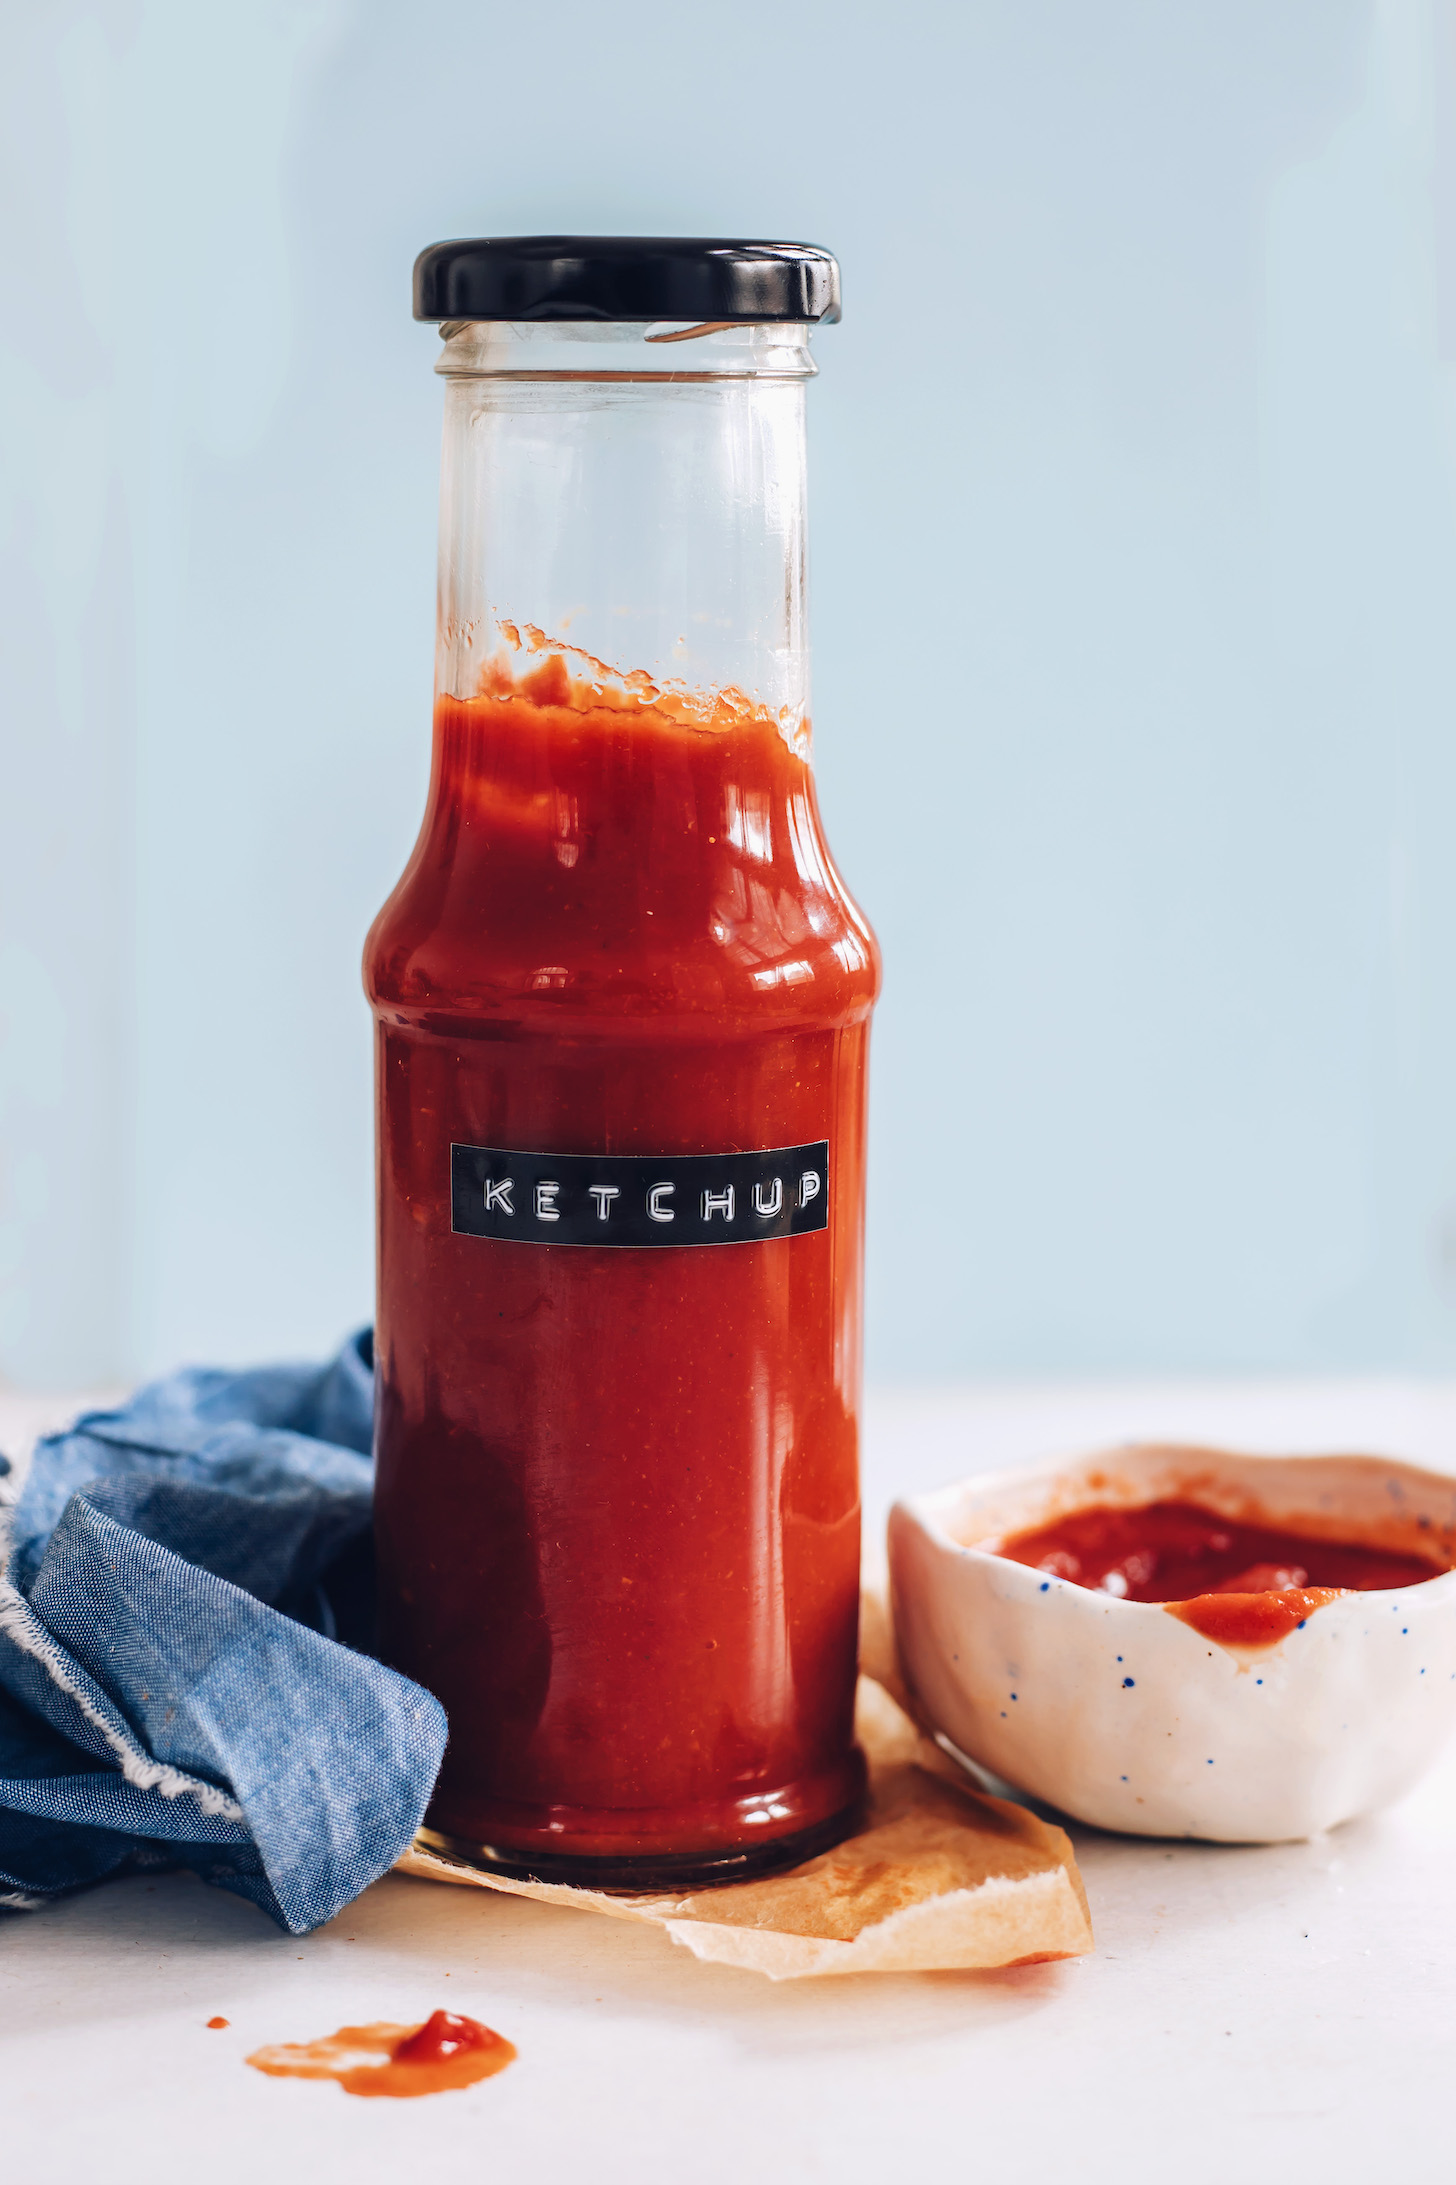 Bowl and jar of our naturally sweetened ketchup recipe